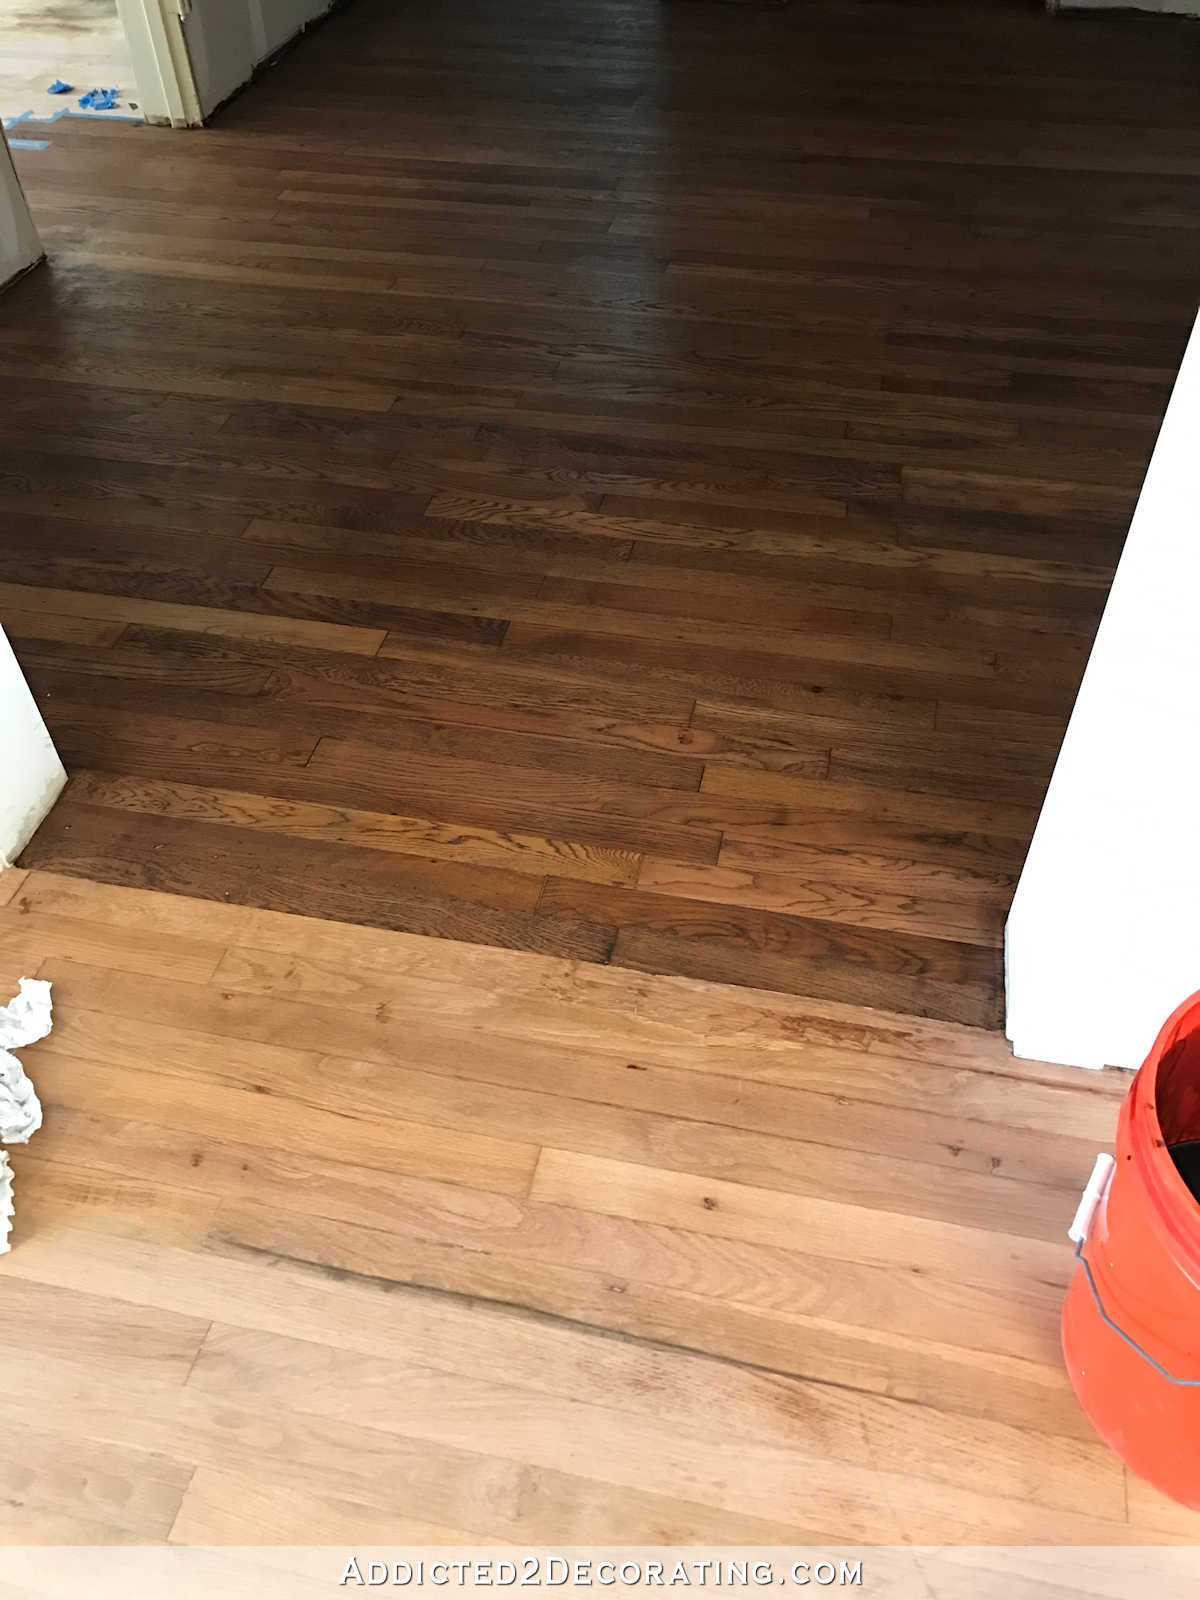 26 Cute Cost to Replace Section Of Hardwood Floor 2024 free download cost to replace section of hardwood floor of adventures in staining my red oak hardwood floors products process within staining red oak hardwood floors 2 tape off one section at a time for